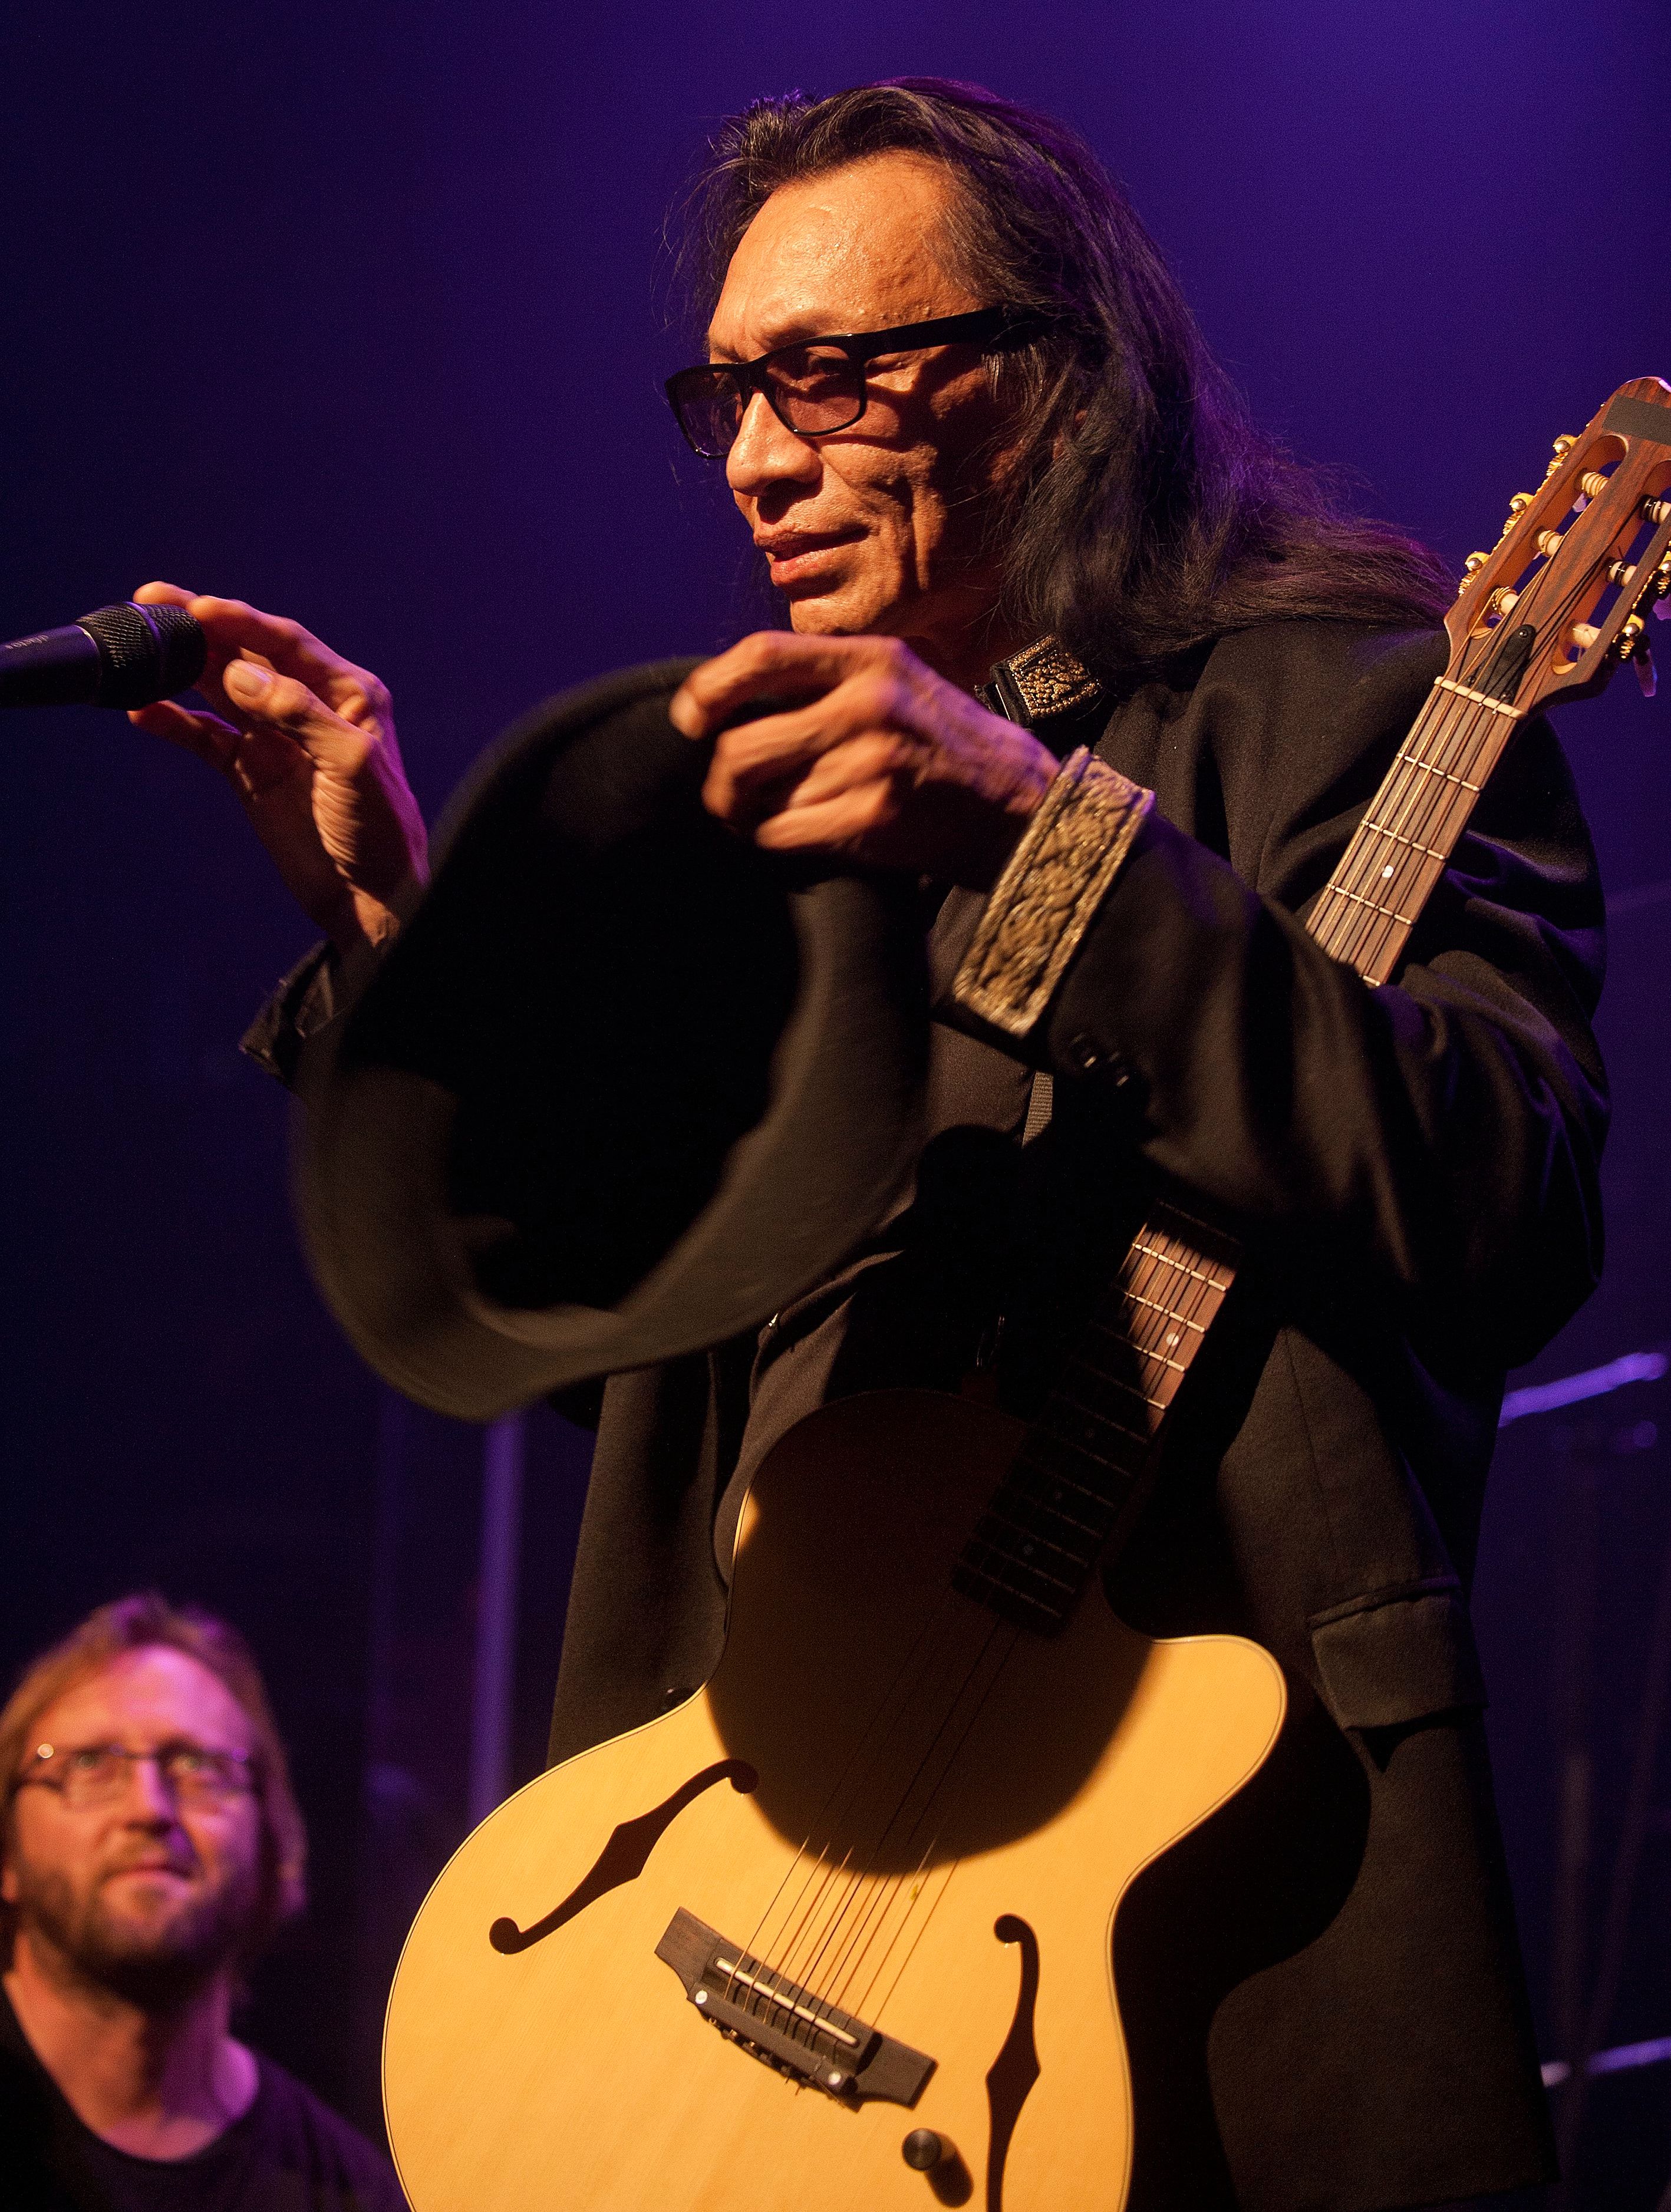 Sixto Rodriguez performs during a concert at the Montreux Jazz Lab